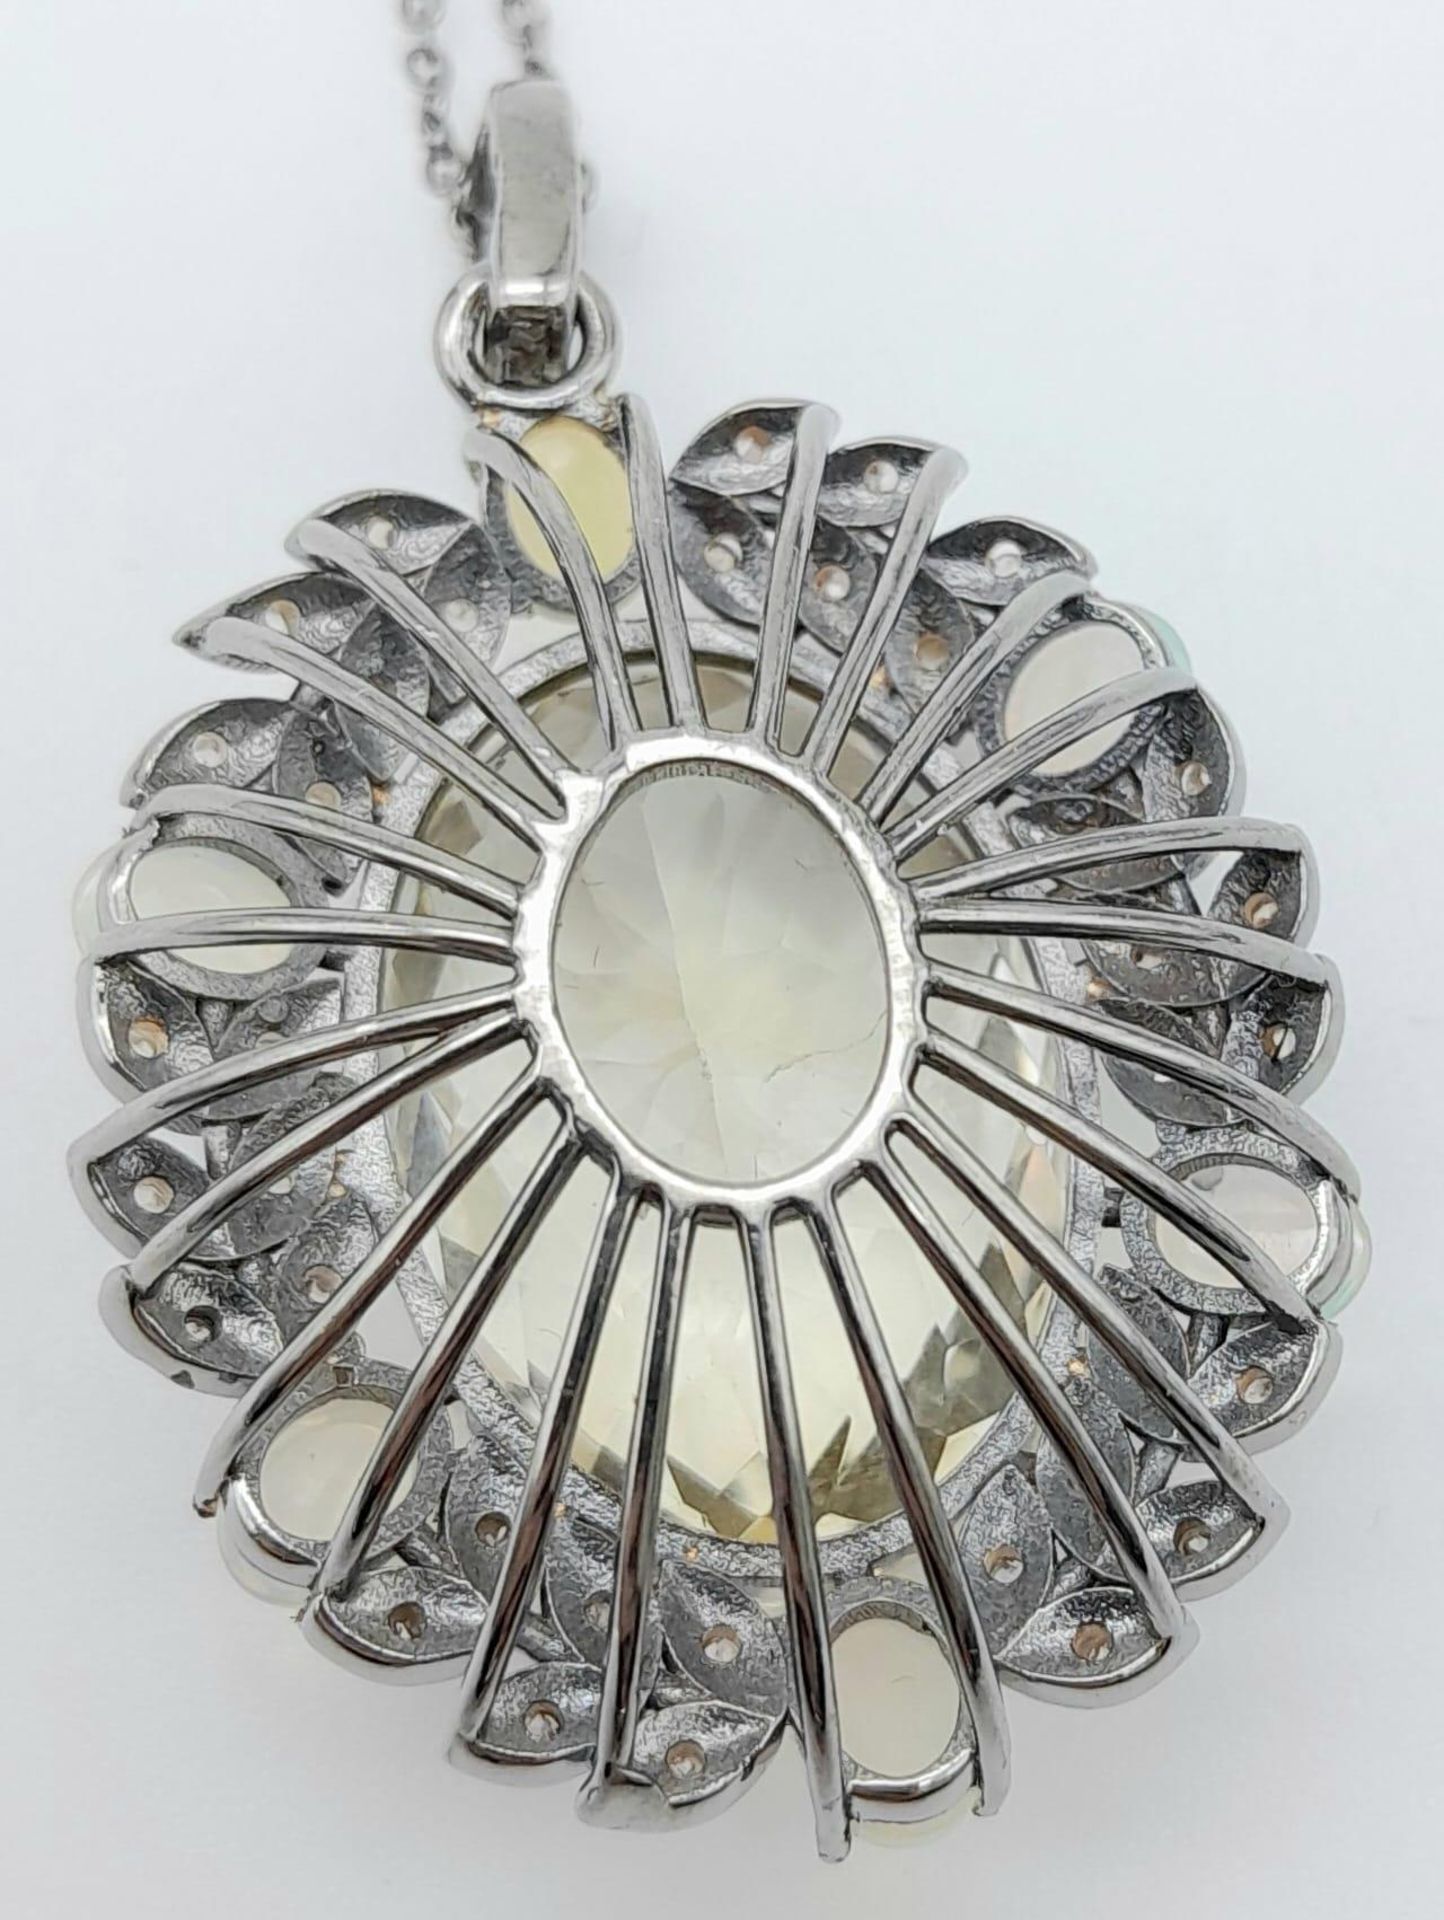 A Citrine Pendant with Opal and Diamond Surround on 925 Silver Chain.22ct citrine, 1.30ctw opals, - Image 5 of 6